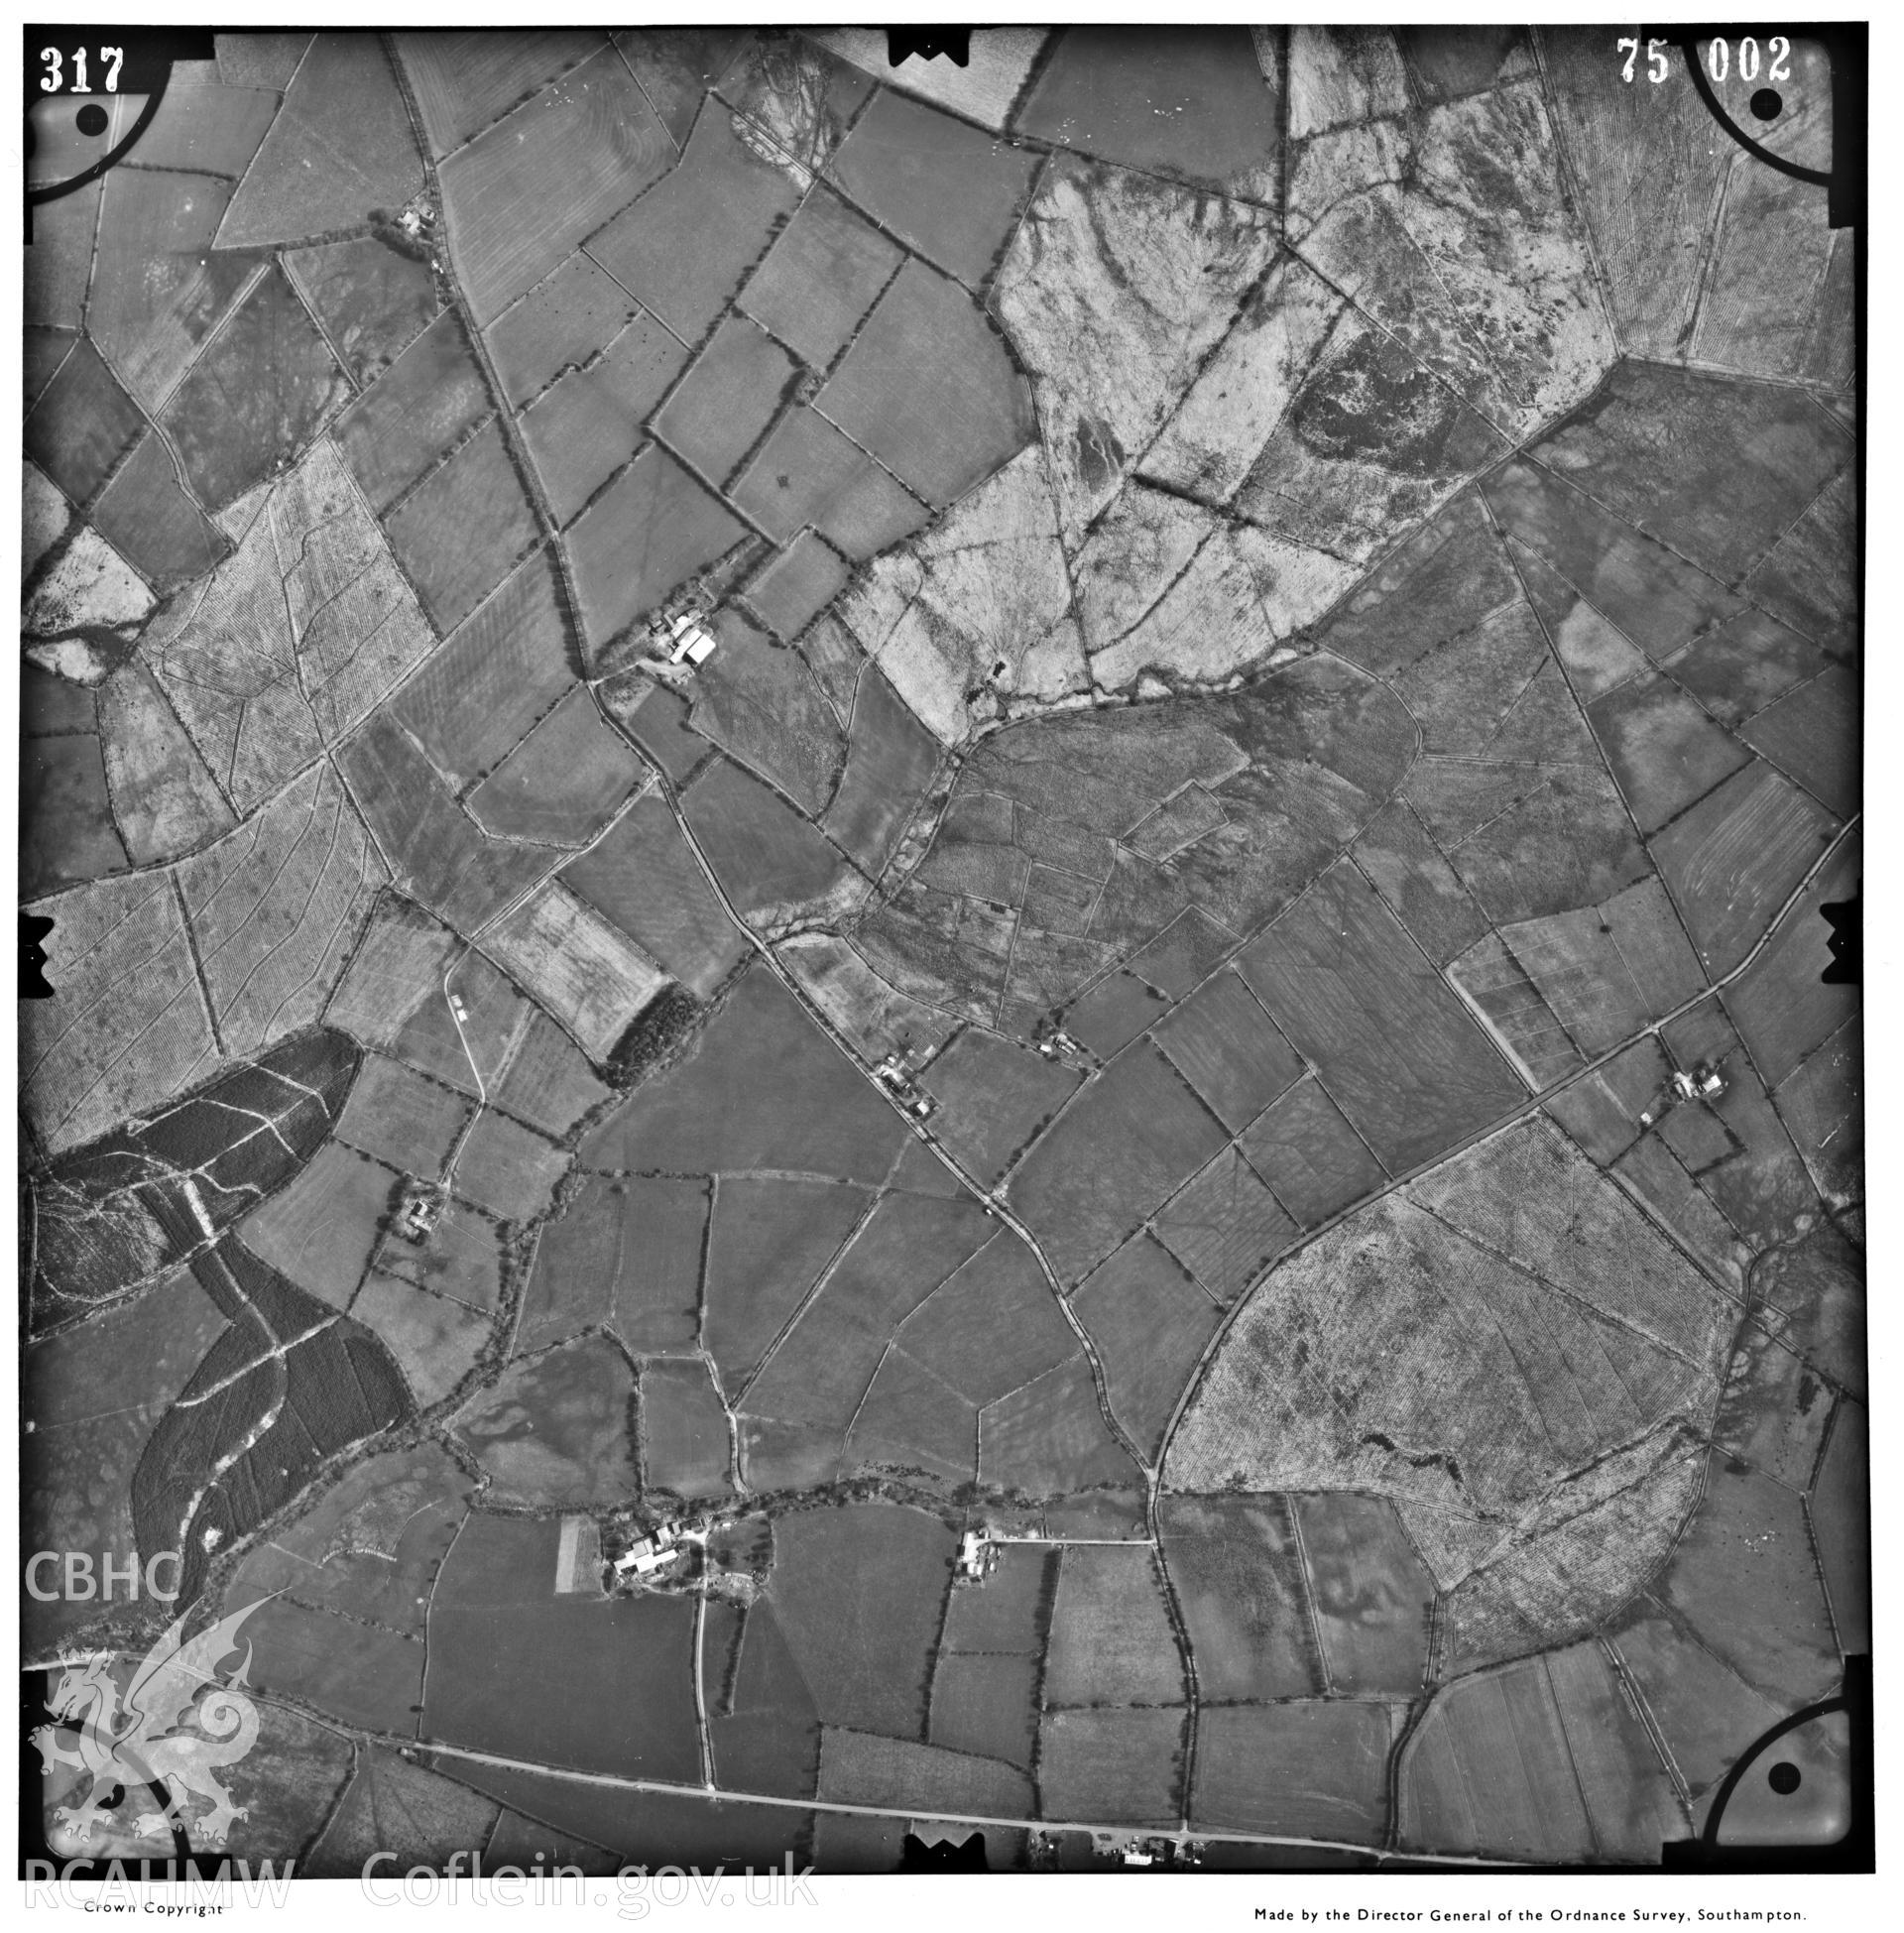 Digitized copy of an aerial photograph showing Cilcennin area, taken by Ordnance Survey, 1975.